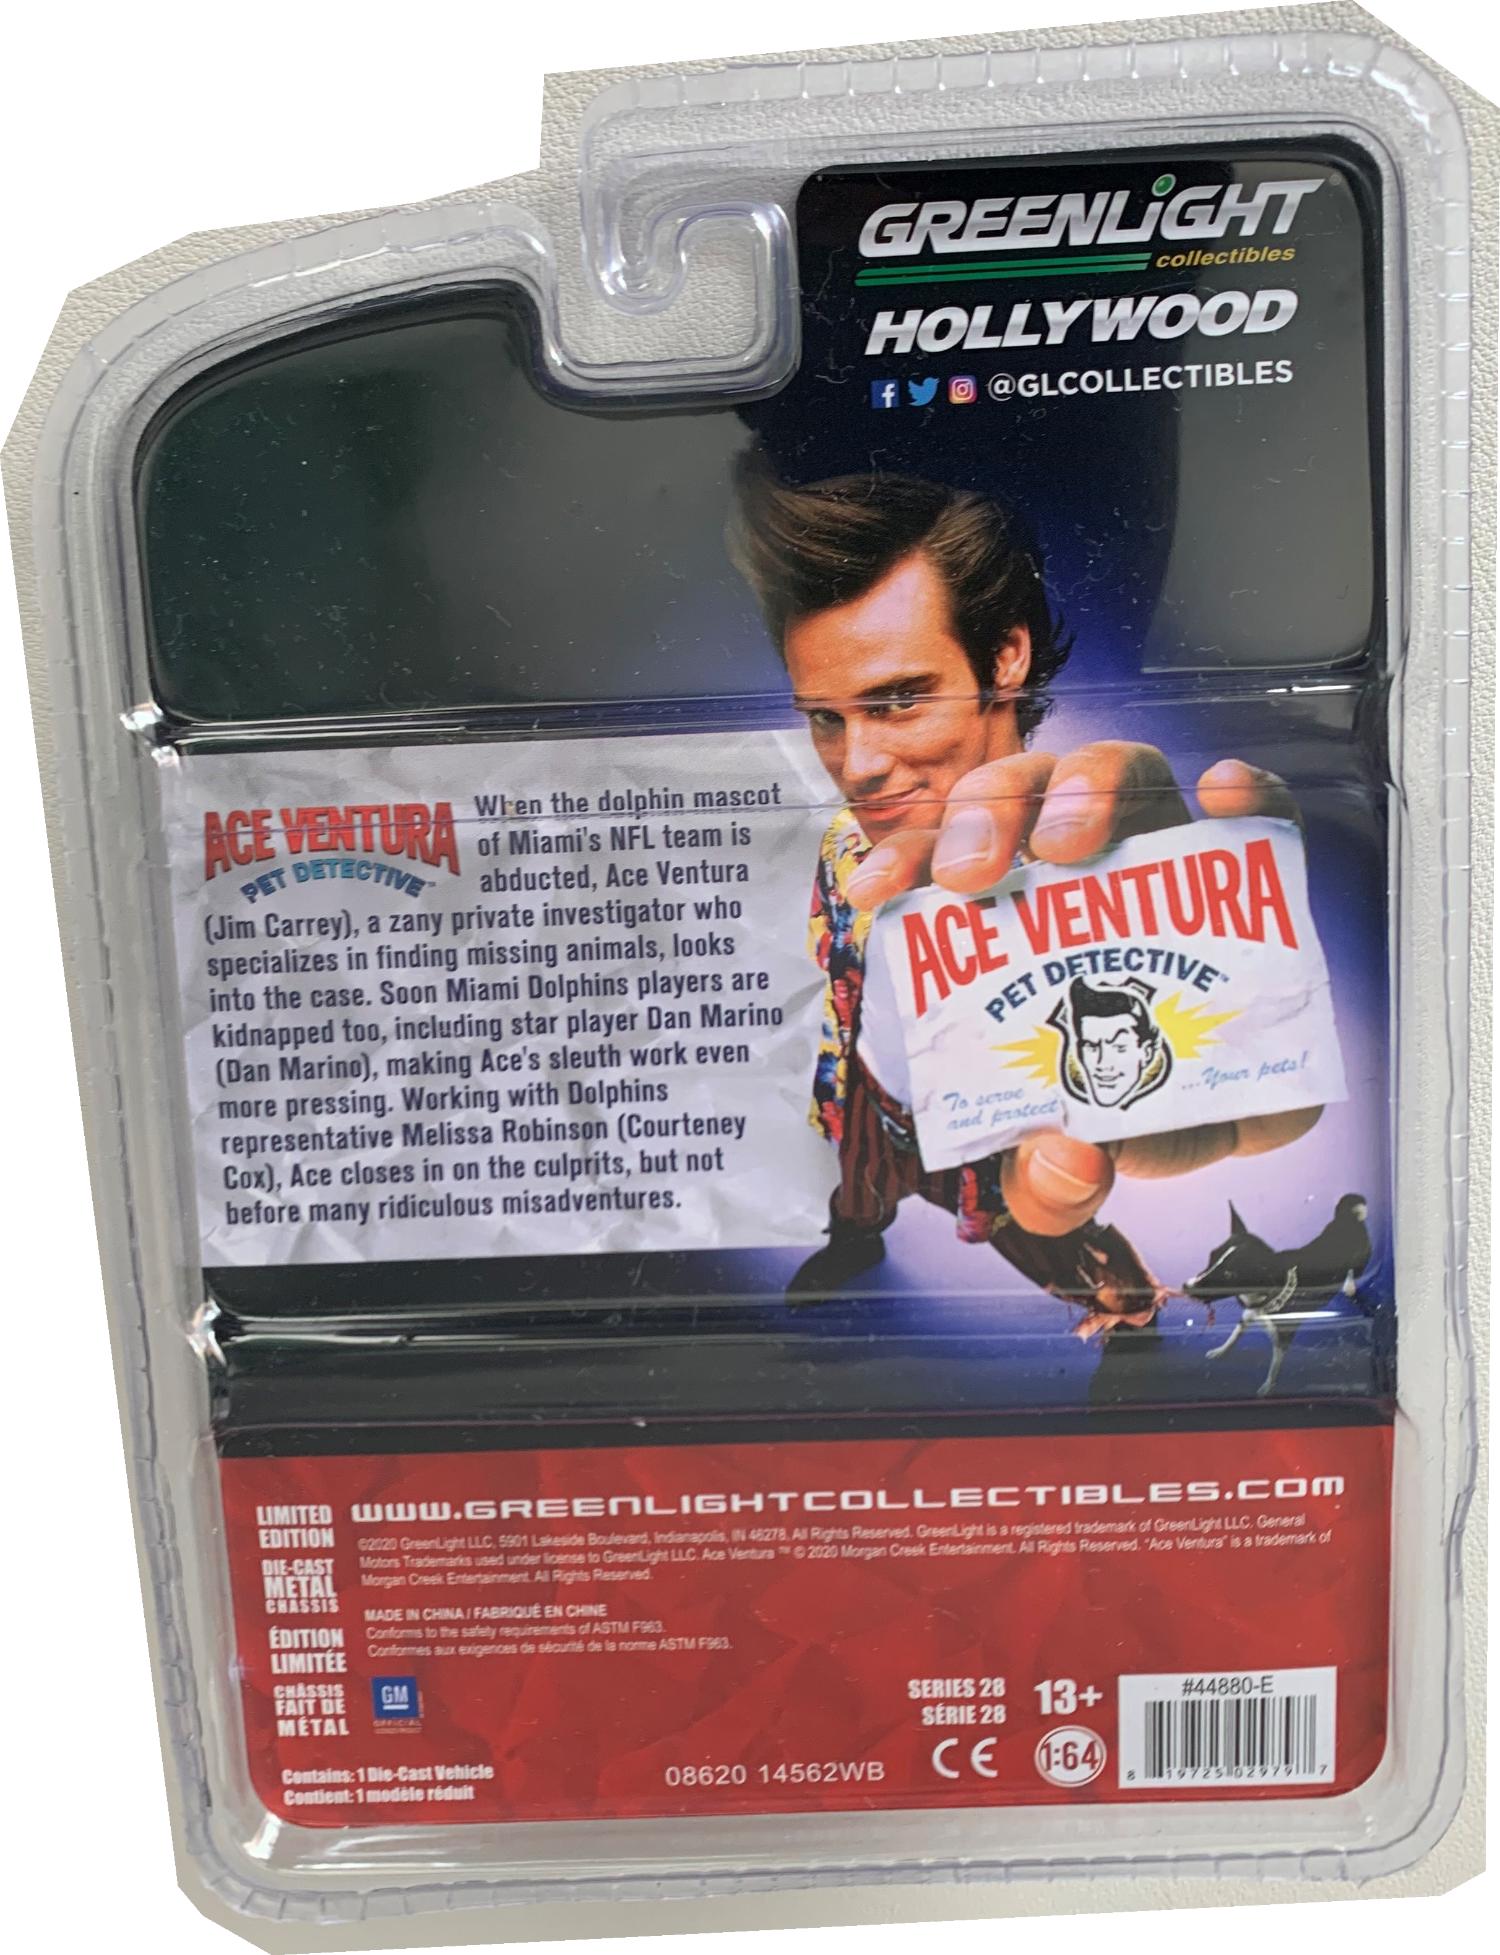 Ace Ventura, Pet Detective 1989 Chevrolet Blazer in black 1:64 scale model from Greenlight, limited edition